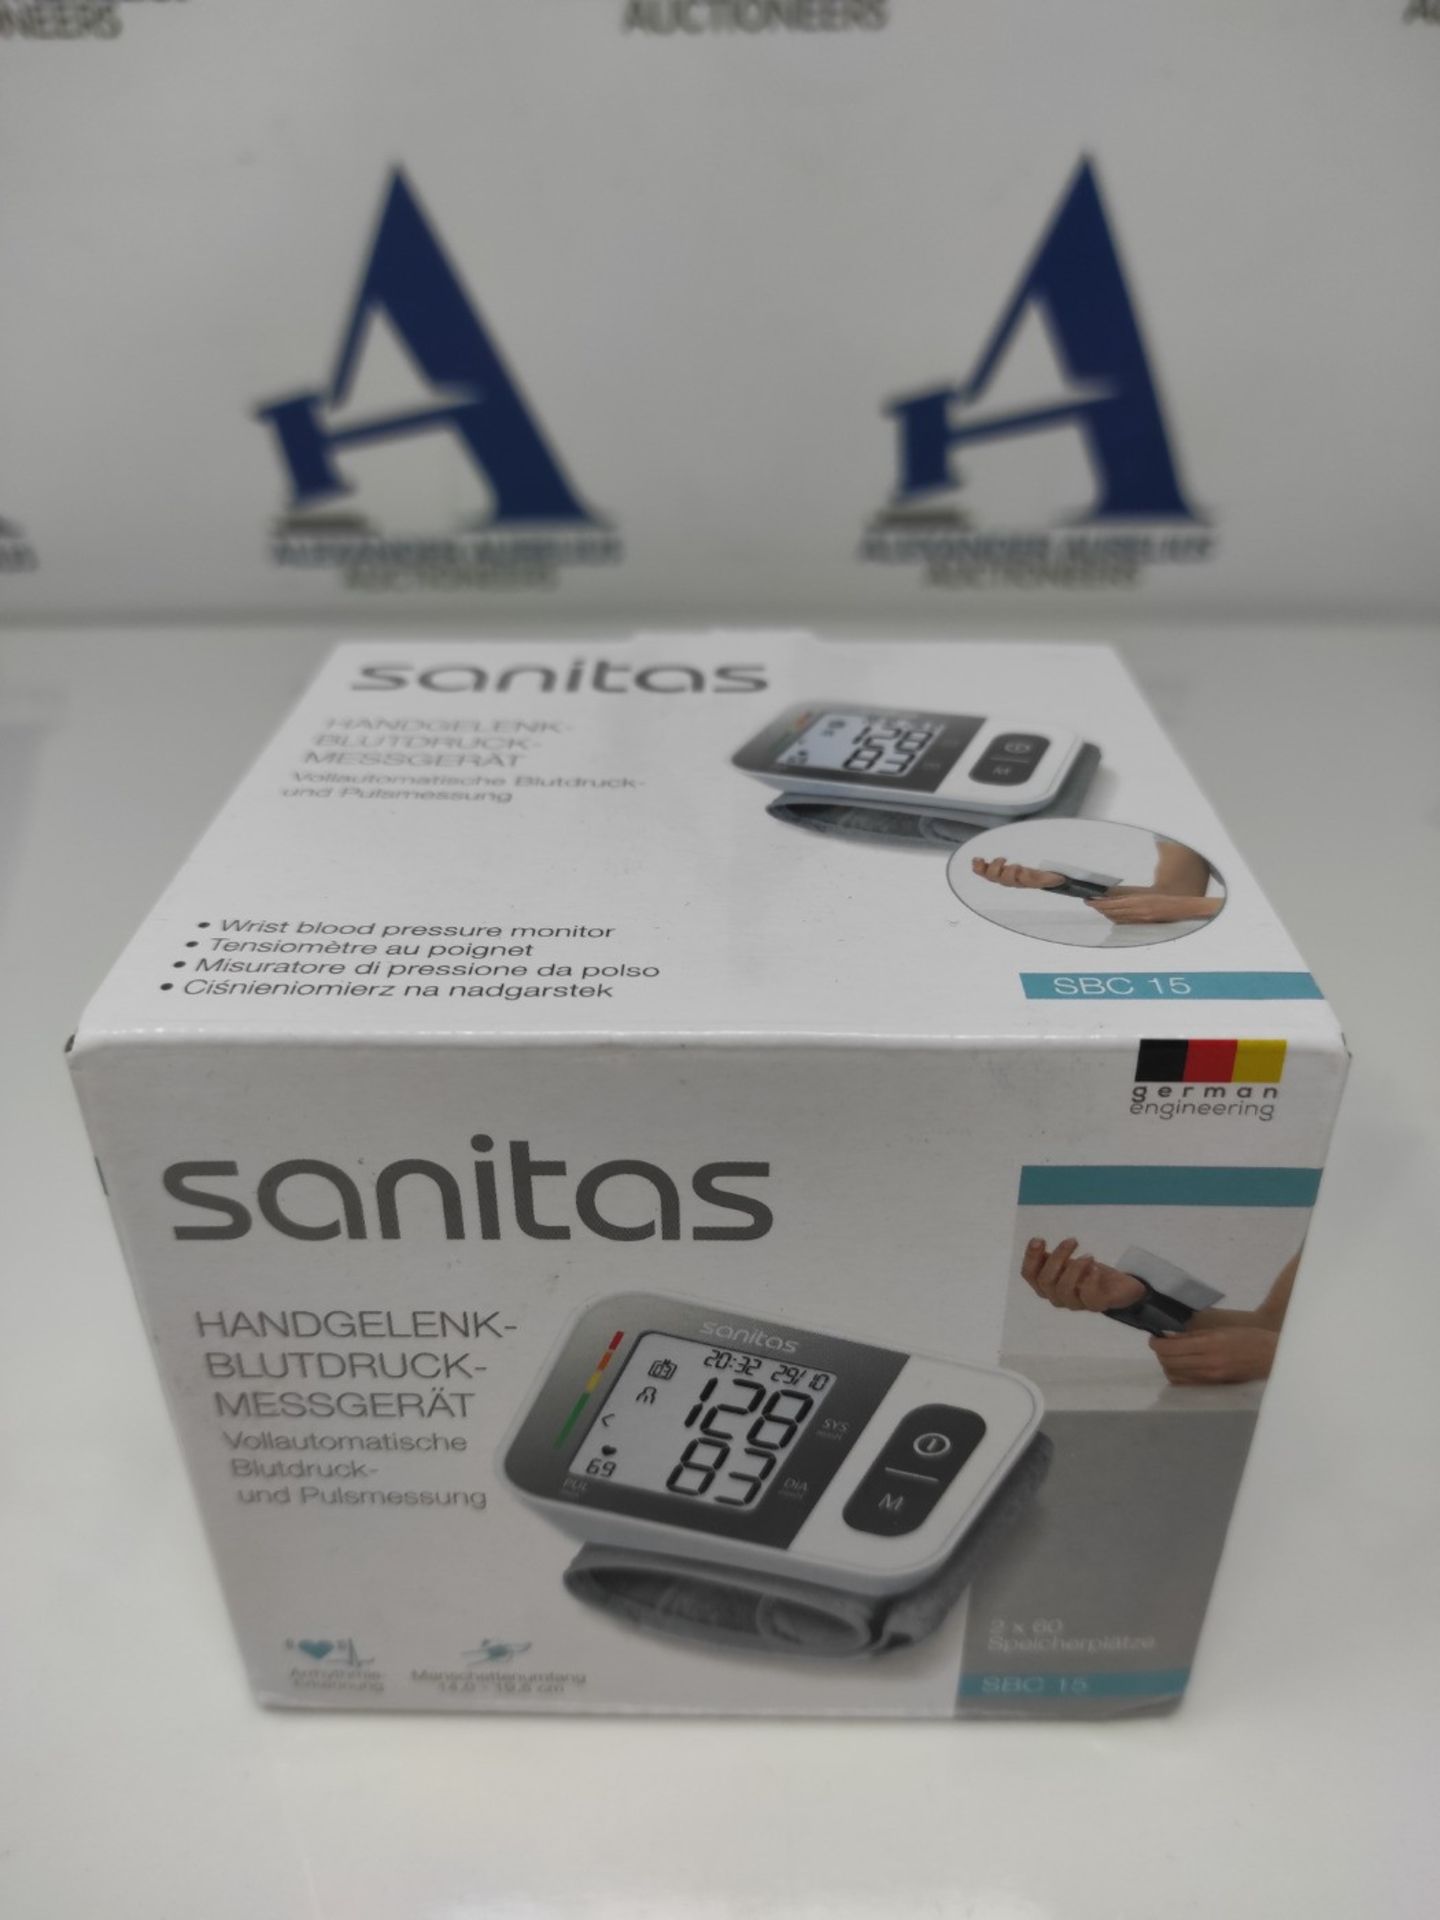 Sanitas SBC 15 wrist blood pressure monitor, fully automatic blood pressure and pulse - Image 2 of 3